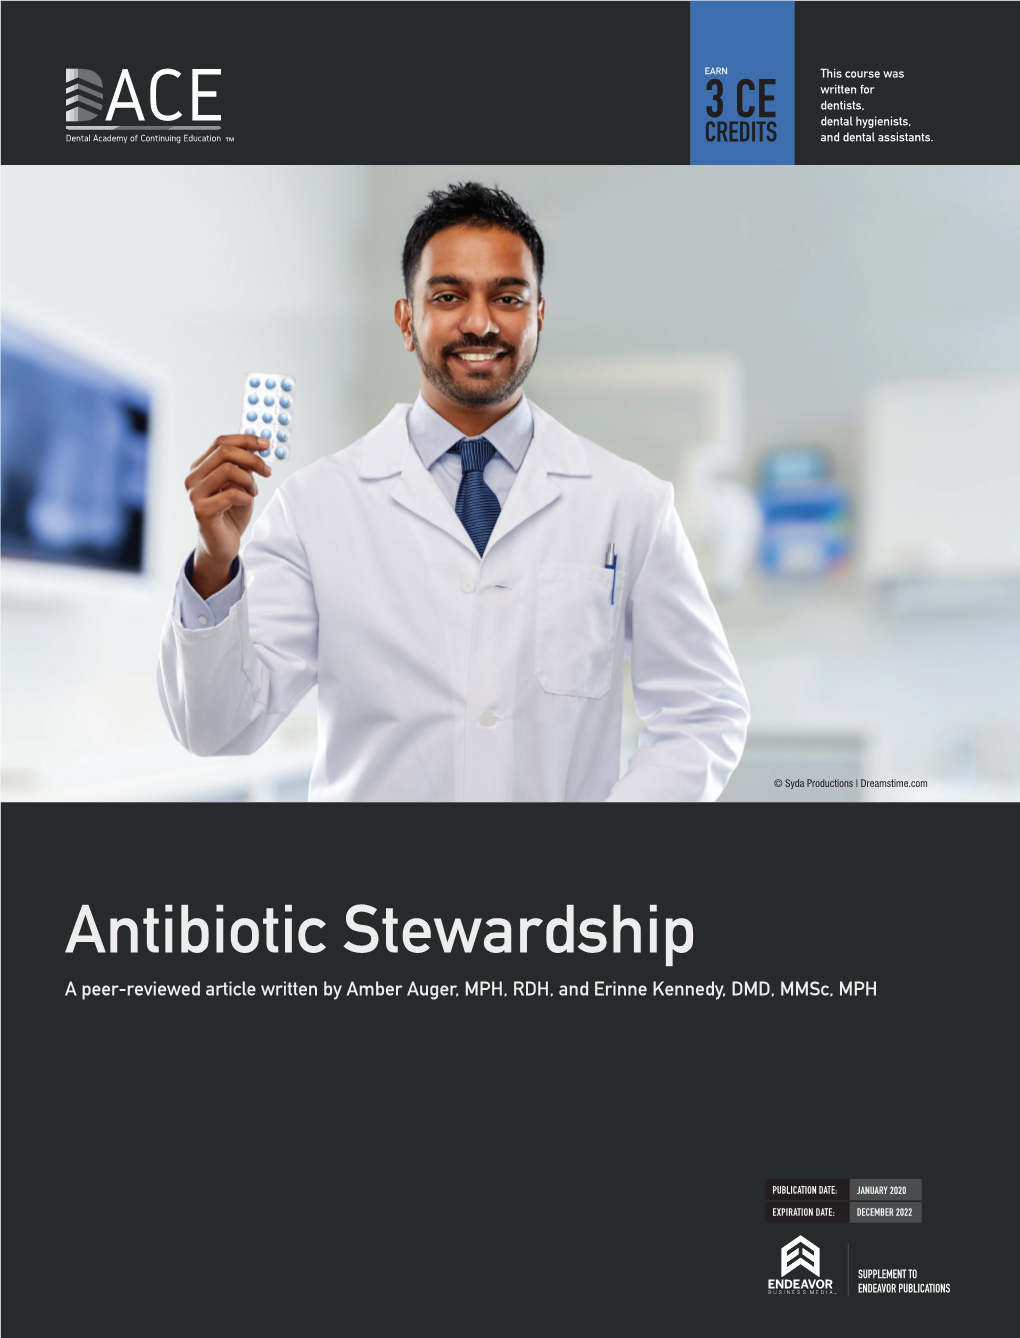 Antibiotic Stewardship a Peer-Reviewed Article Written by Amber Auger, MPH, RDH, and Erinne Kennedy, DMD, Mmsc, MPH